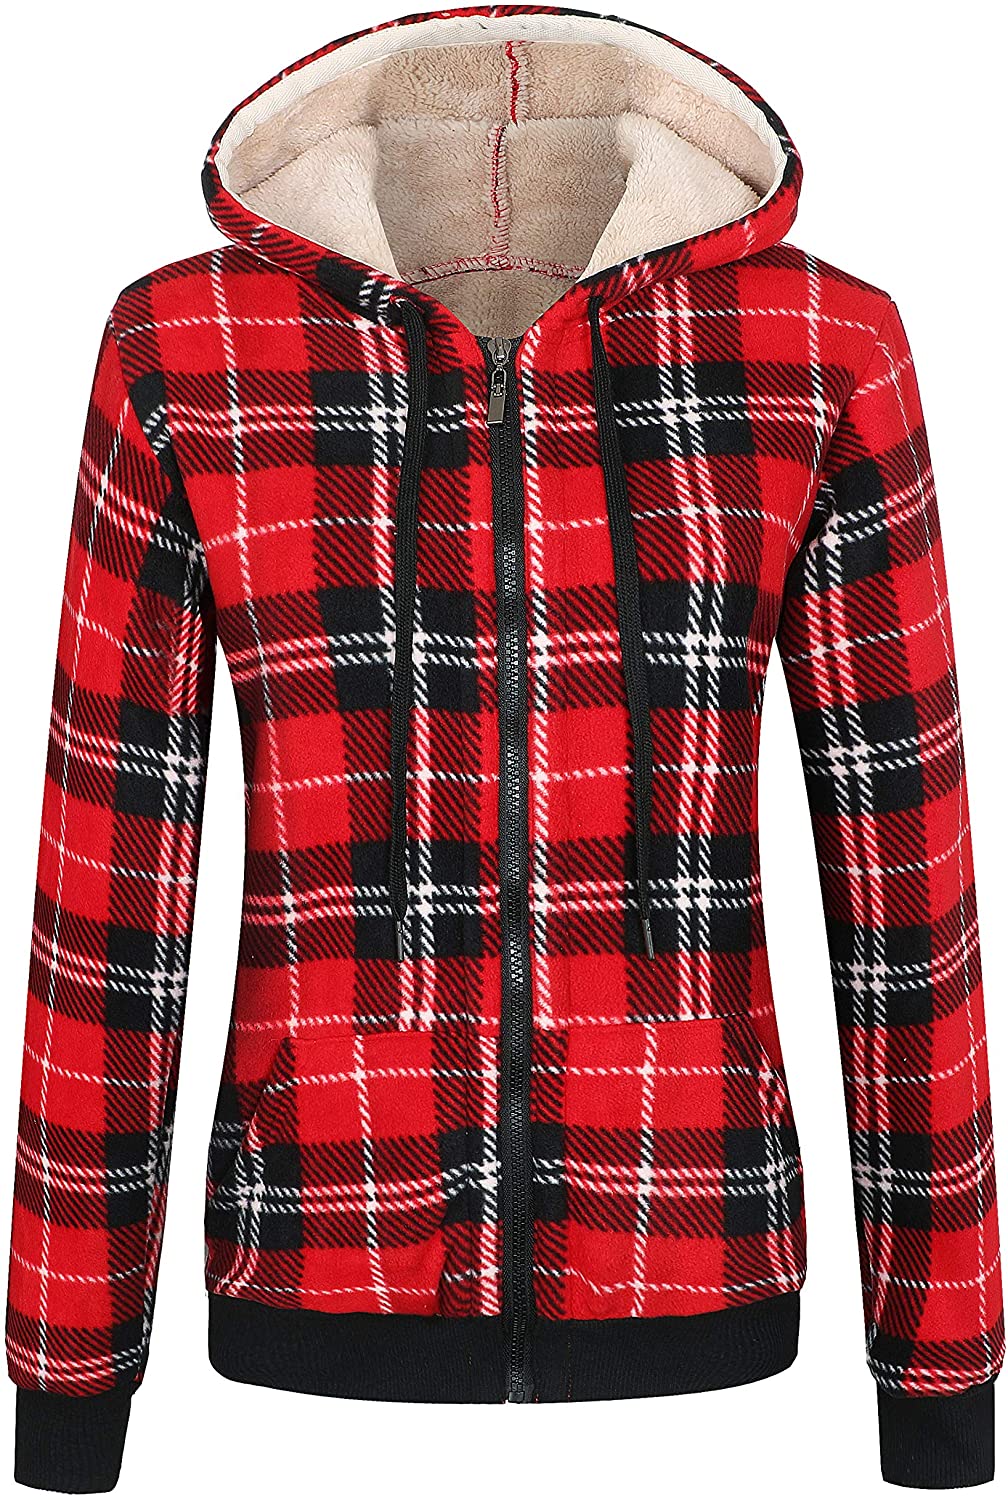 ZENTHACE Women's Sherpa Lined Zip Up Hooded Plaid Shirt Jac Sweater ...